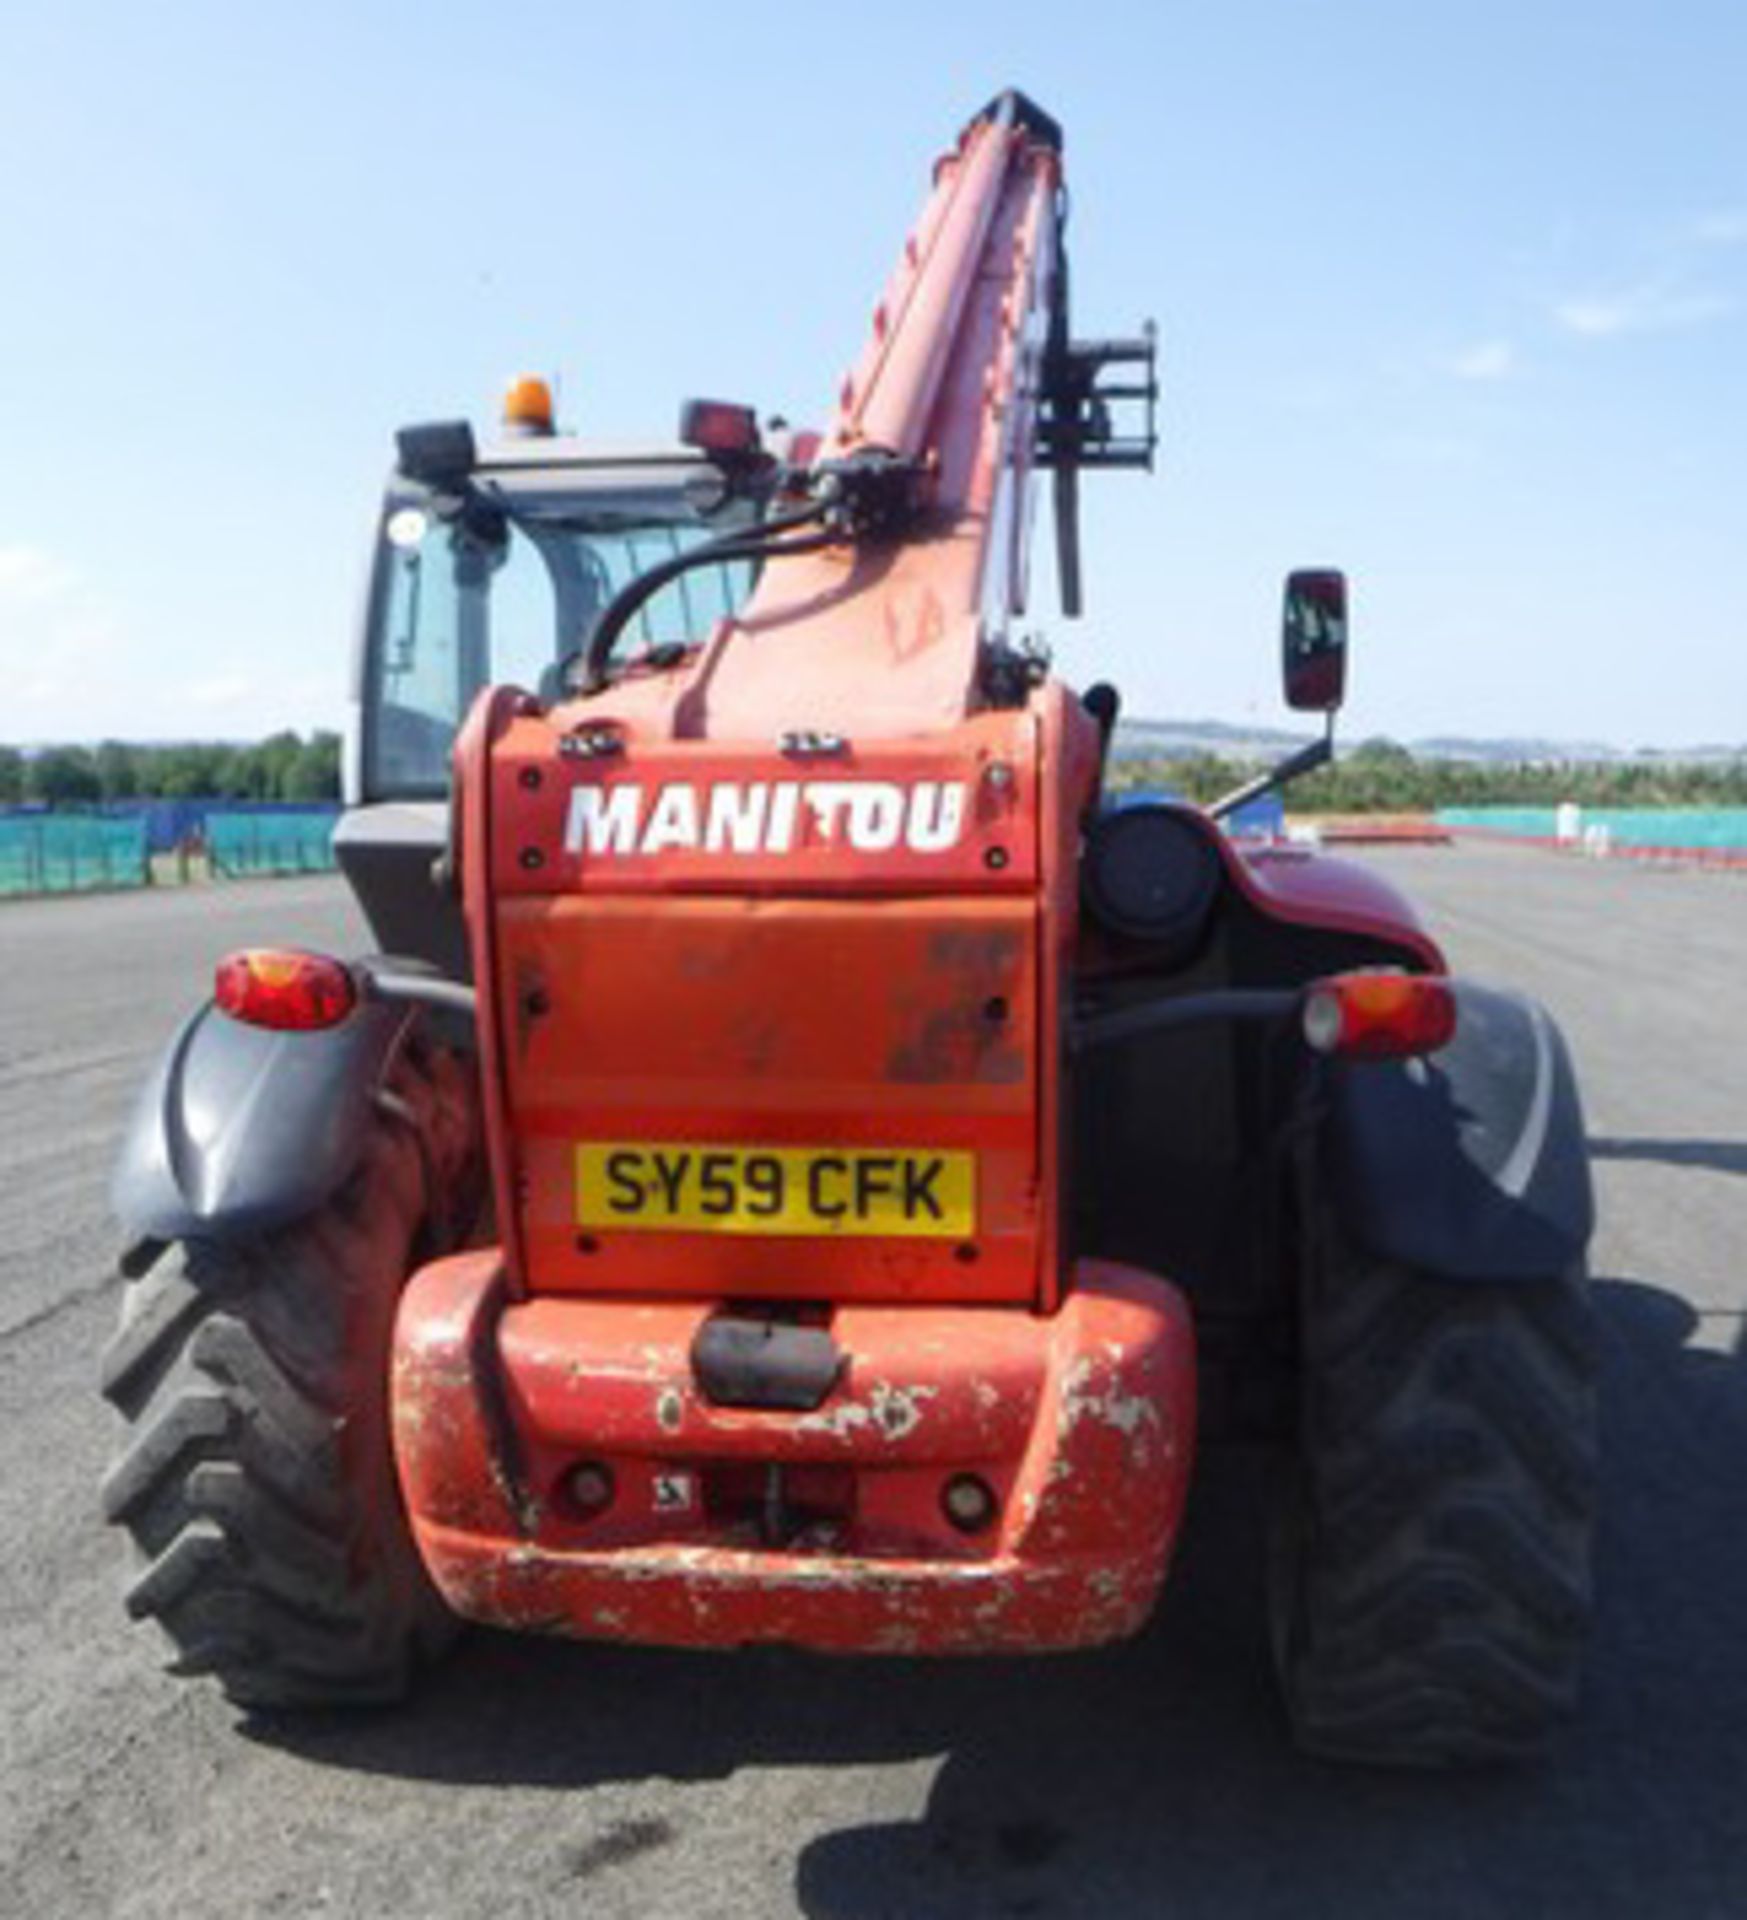 2009 MANITOU MT1840, Reg - SY59CFK. S/N - 258408. 4209 hrs (not verified). C/W set of forks - Image 11 of 13